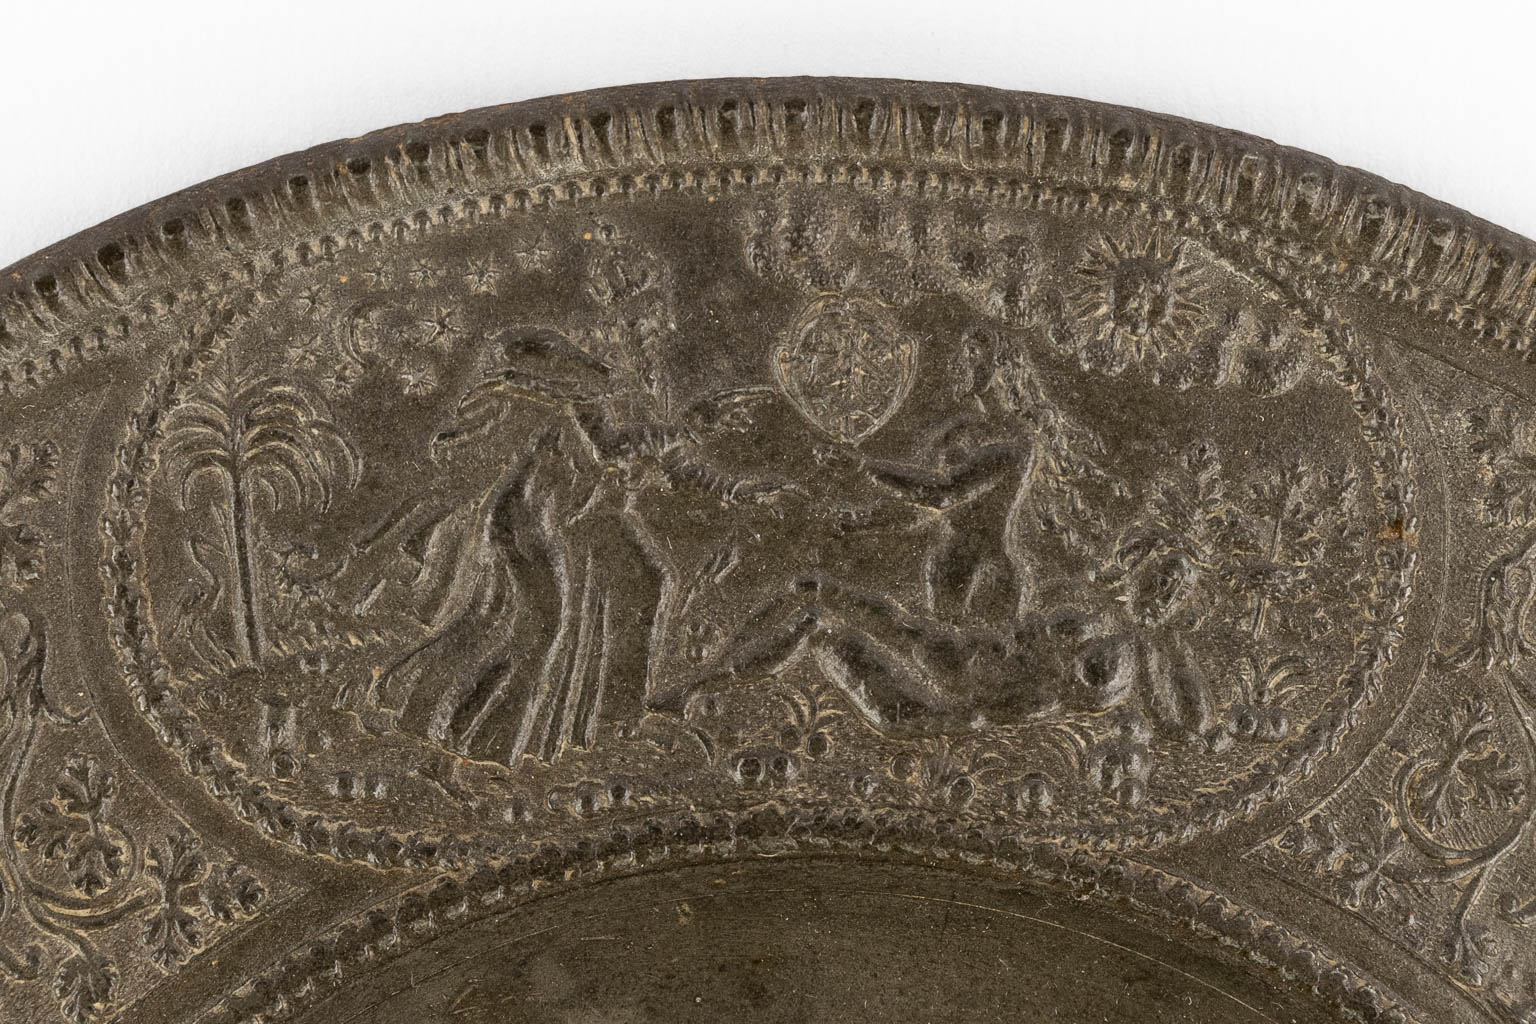 Paulus Oeham de Oude, Nuremberg, Germany. A relief plate, pewter. 17th C. (D:17,8 cm) - Image 2 of 11